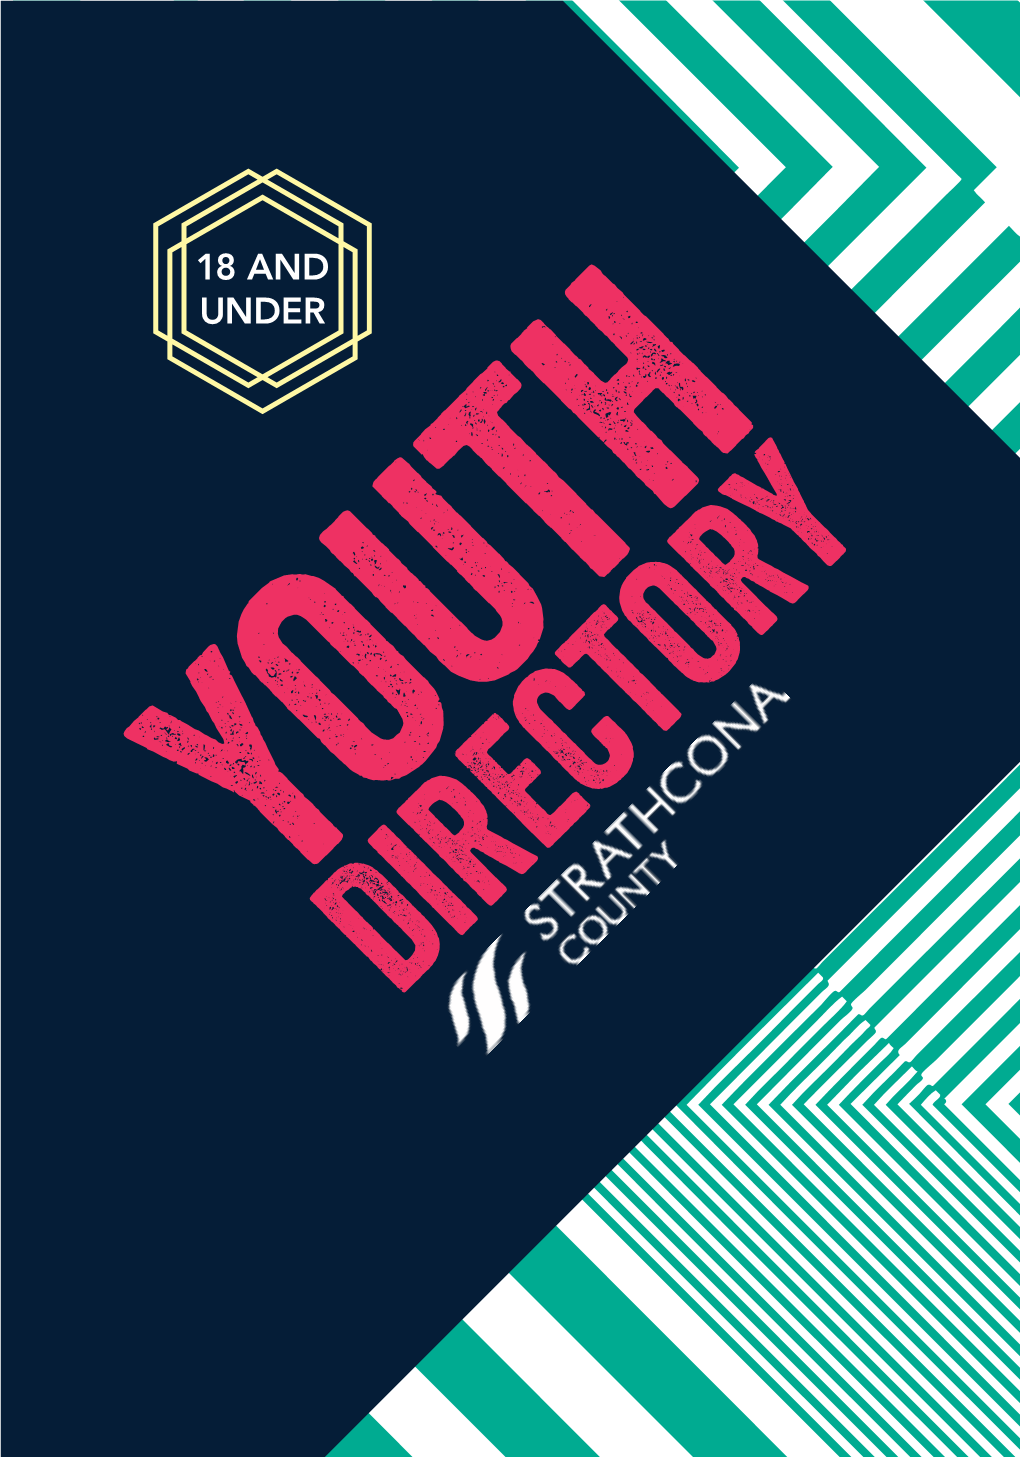 Strathconca County Youth Directory 2016